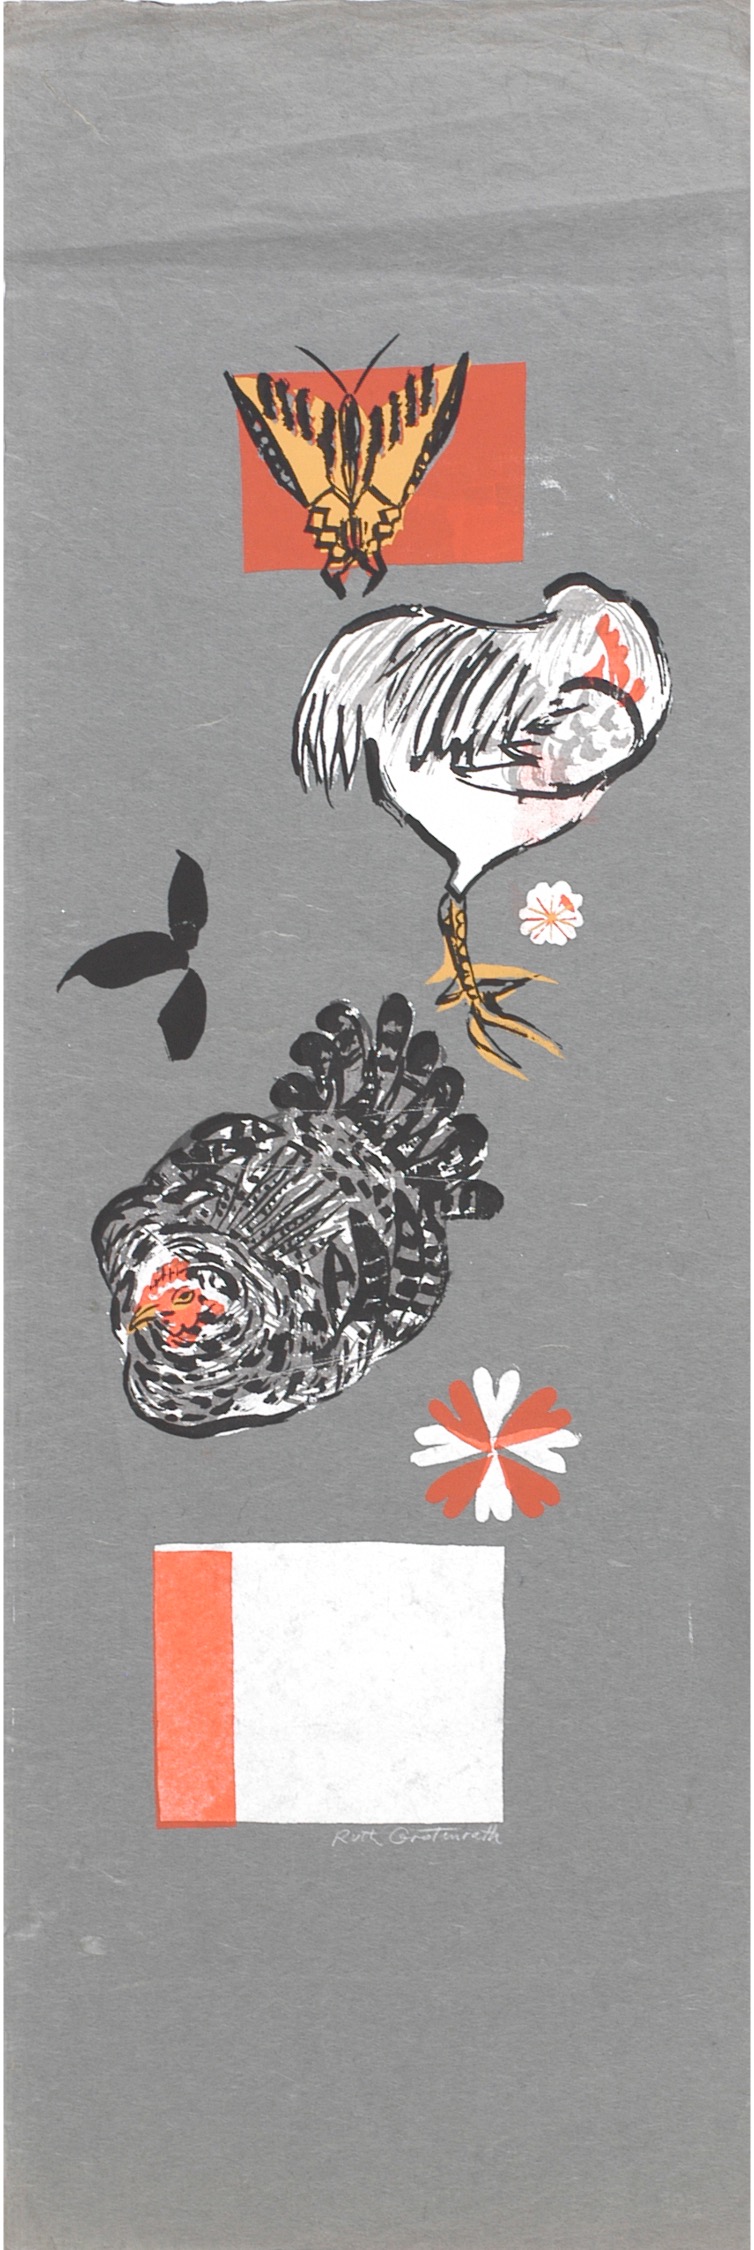 A print showing square fields of cut-out color, two chickens resting, and a butterfly.